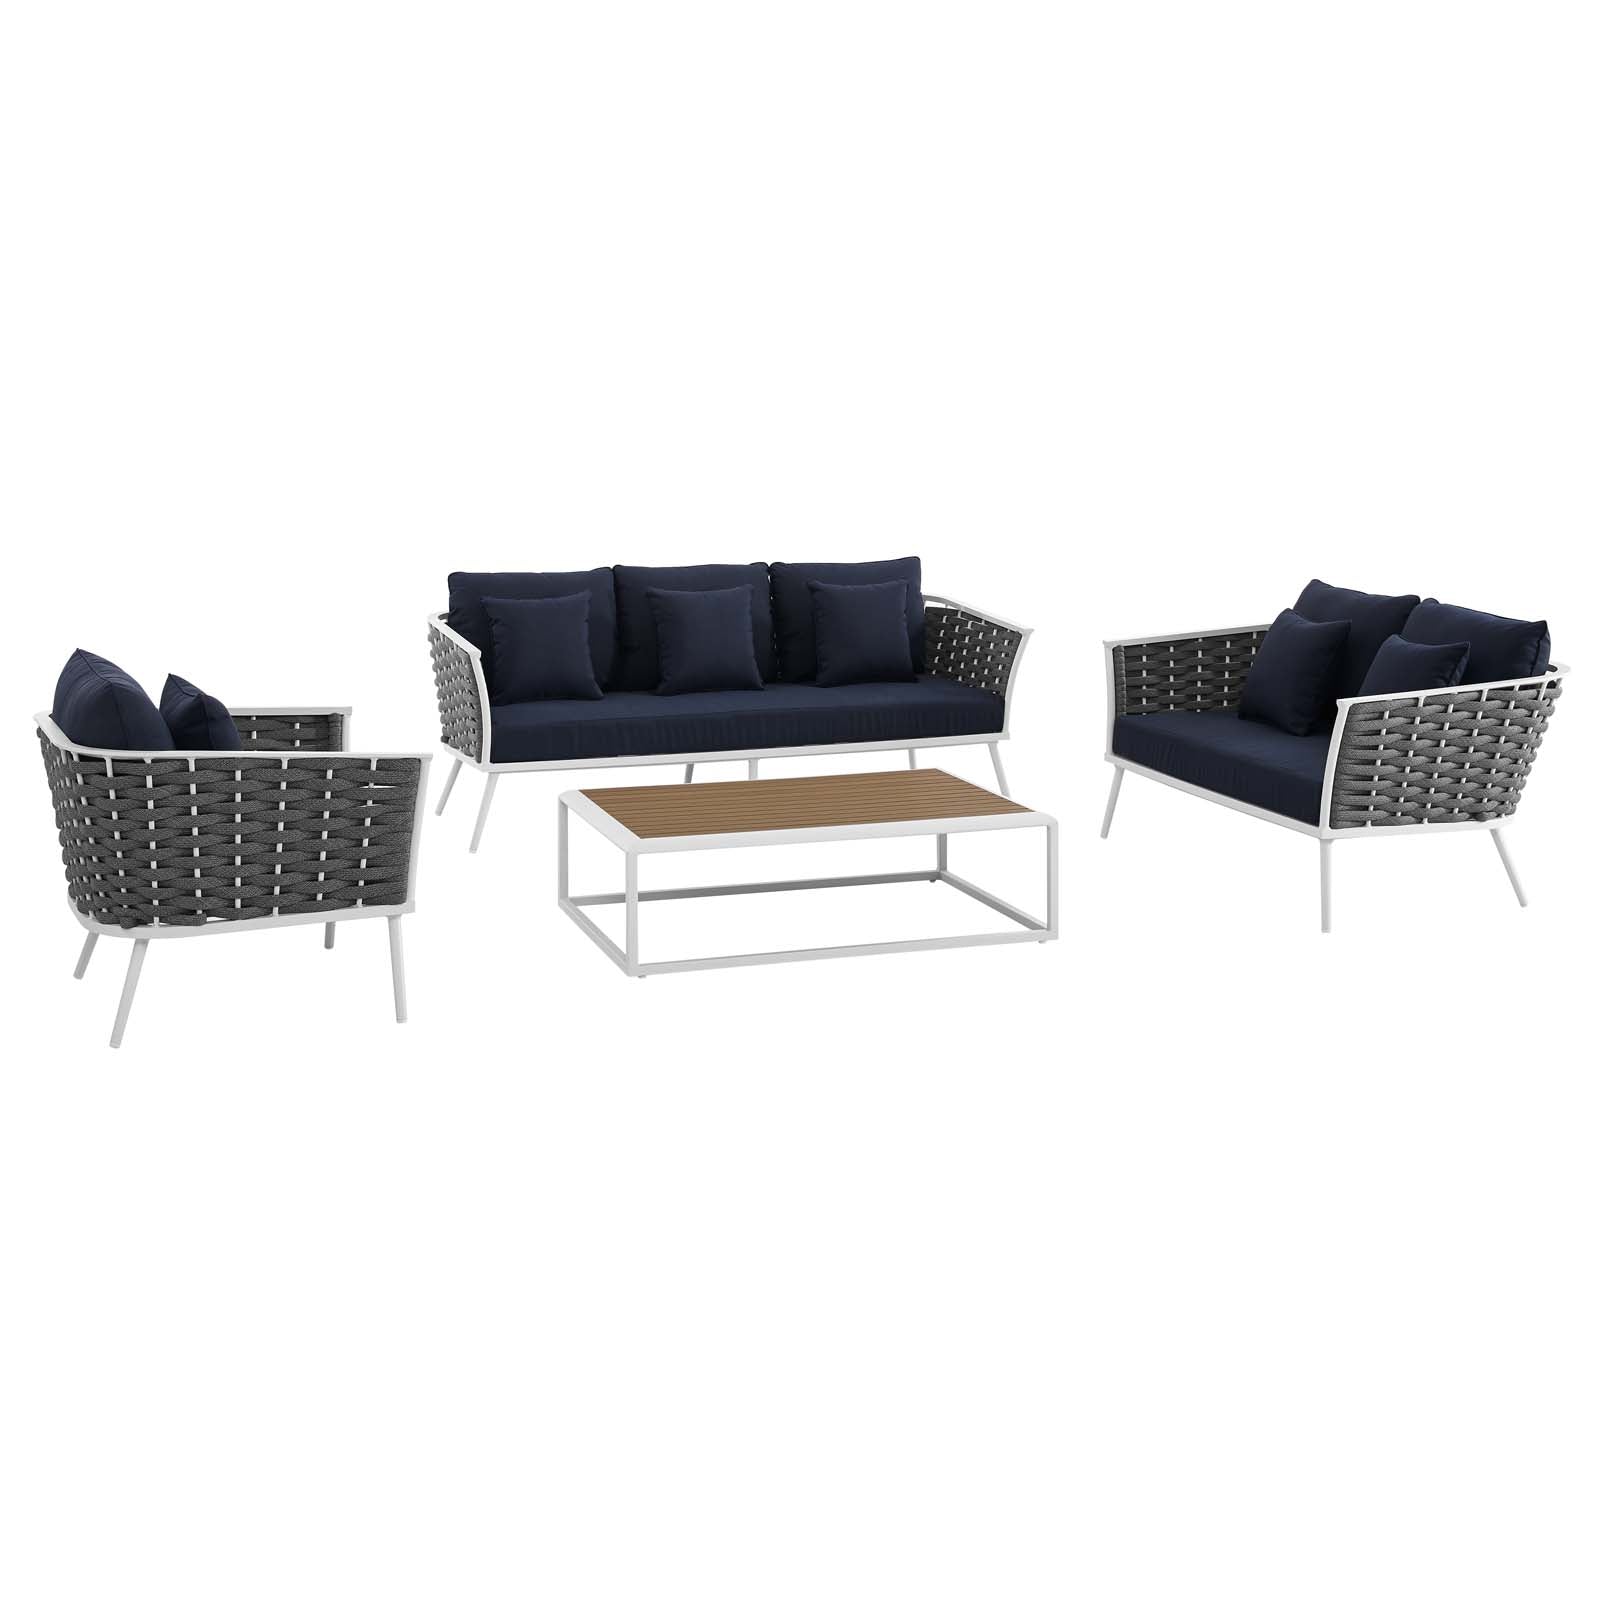 Stance 4 Piece Outdoor 139.5"W Patio Aluminum Sectional Sofa Set White